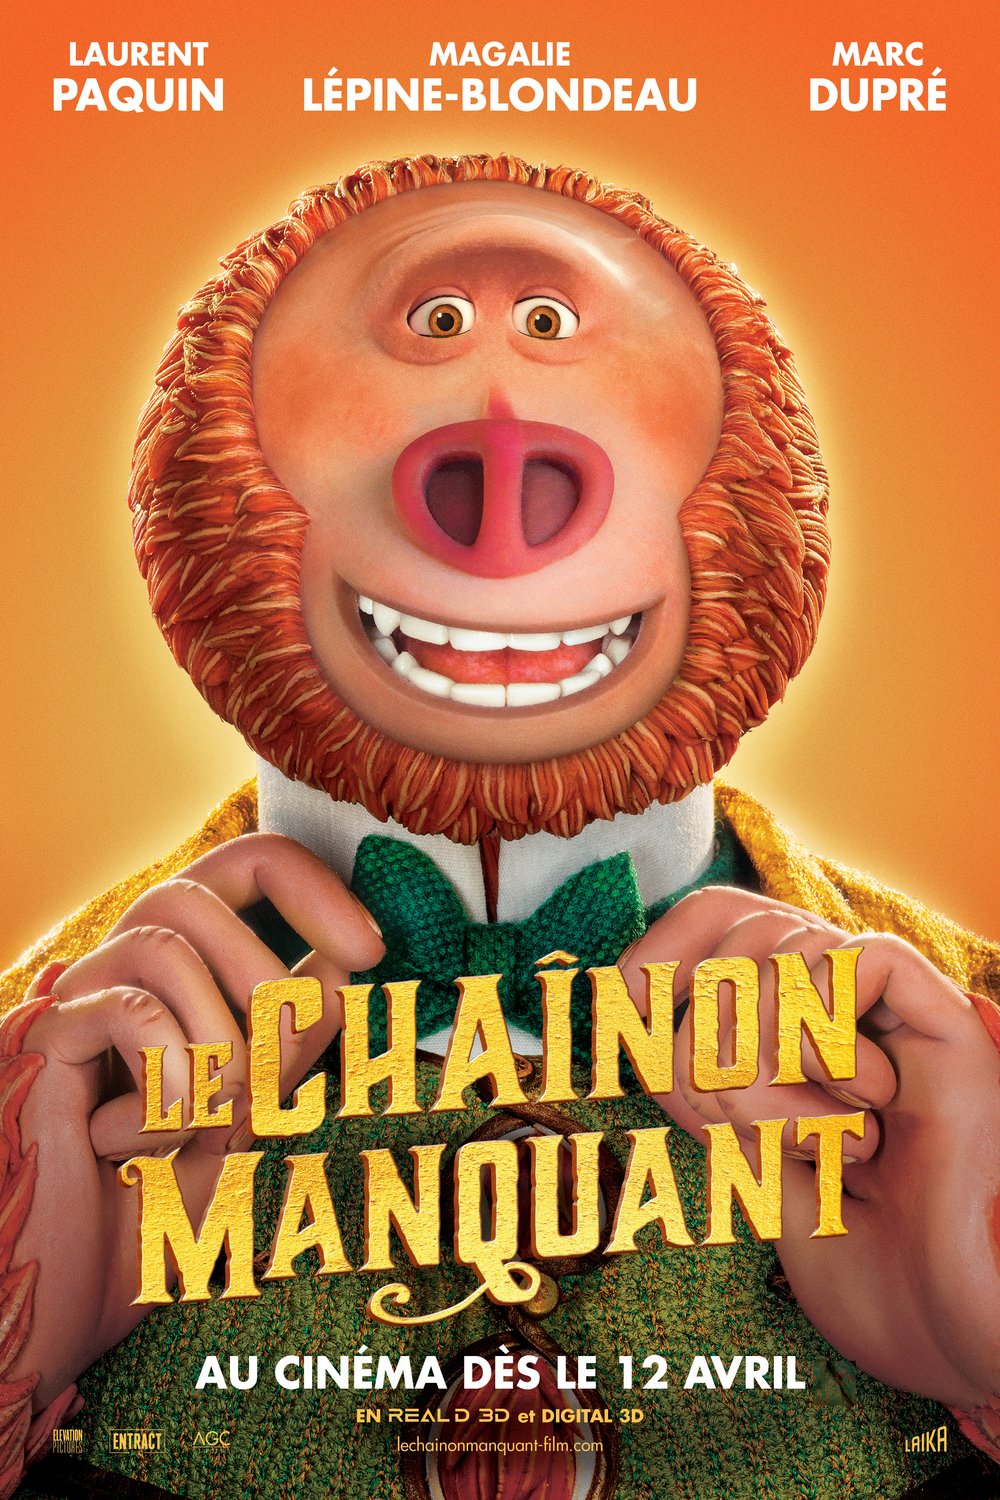 Poster of the movie Le Chaînon manquant